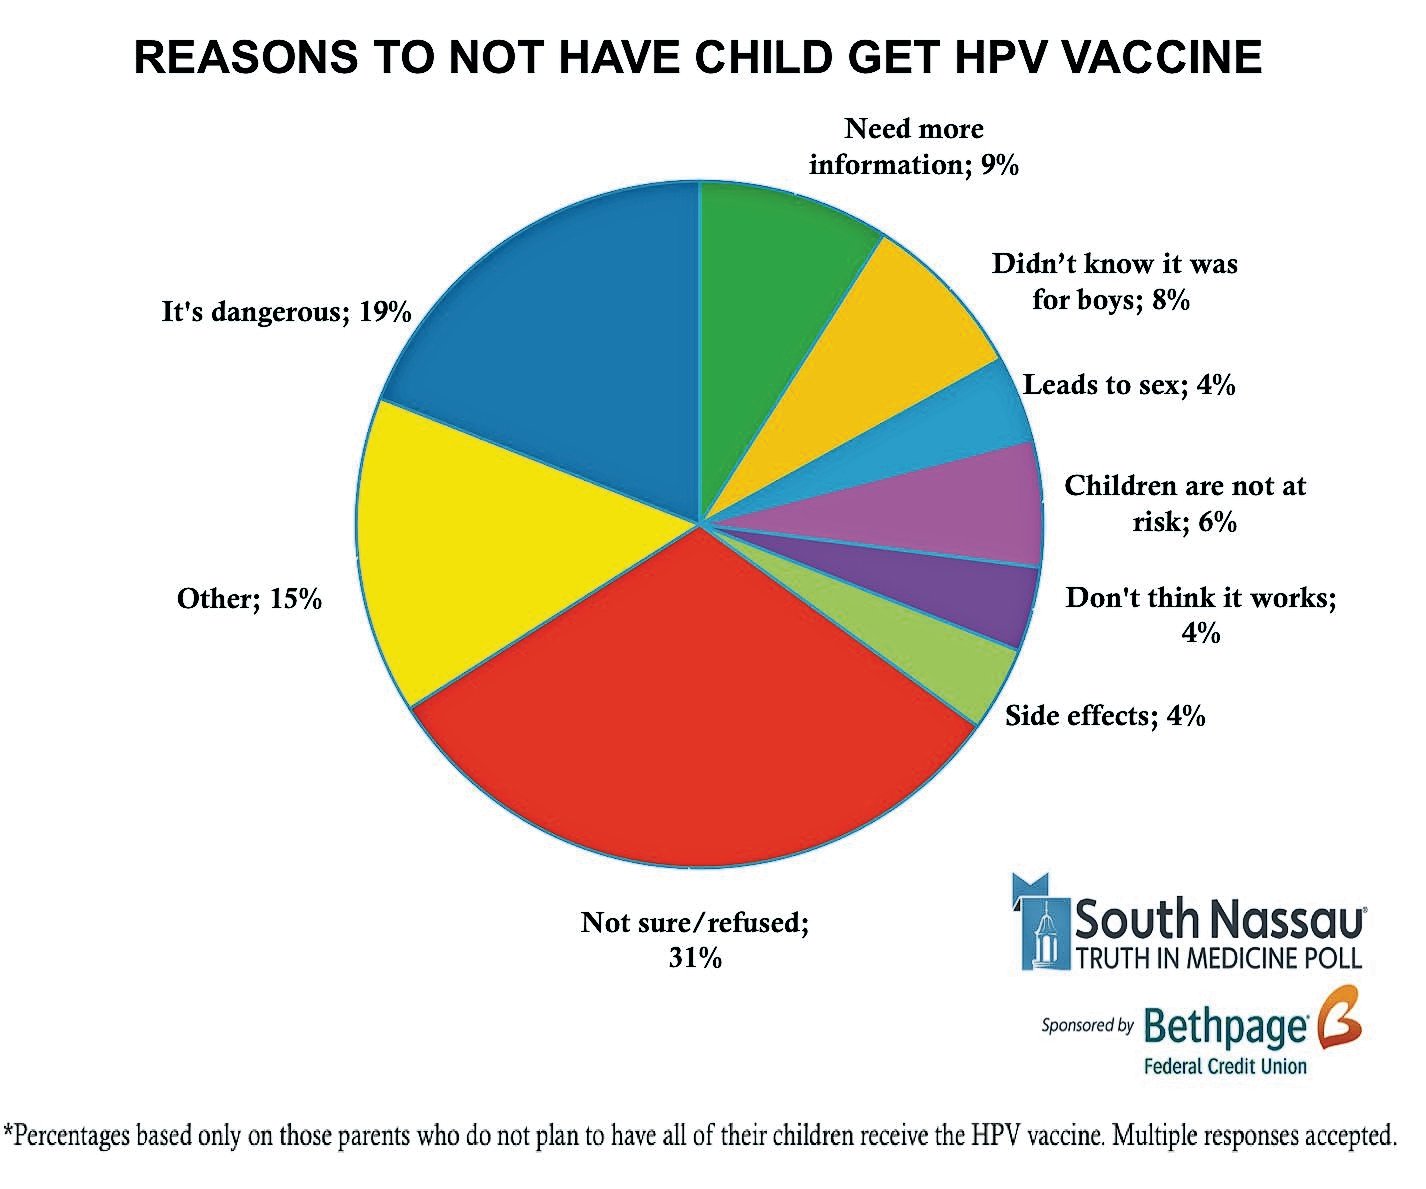 Of the parents who said they do not plan to have all their children get the HPV vaccine, 19 percent said they believed that the vaccine is dangerous and 9 percent needed more information, according to South Nassau Communities Hospital’s latest “Truth In Medicine” poll.